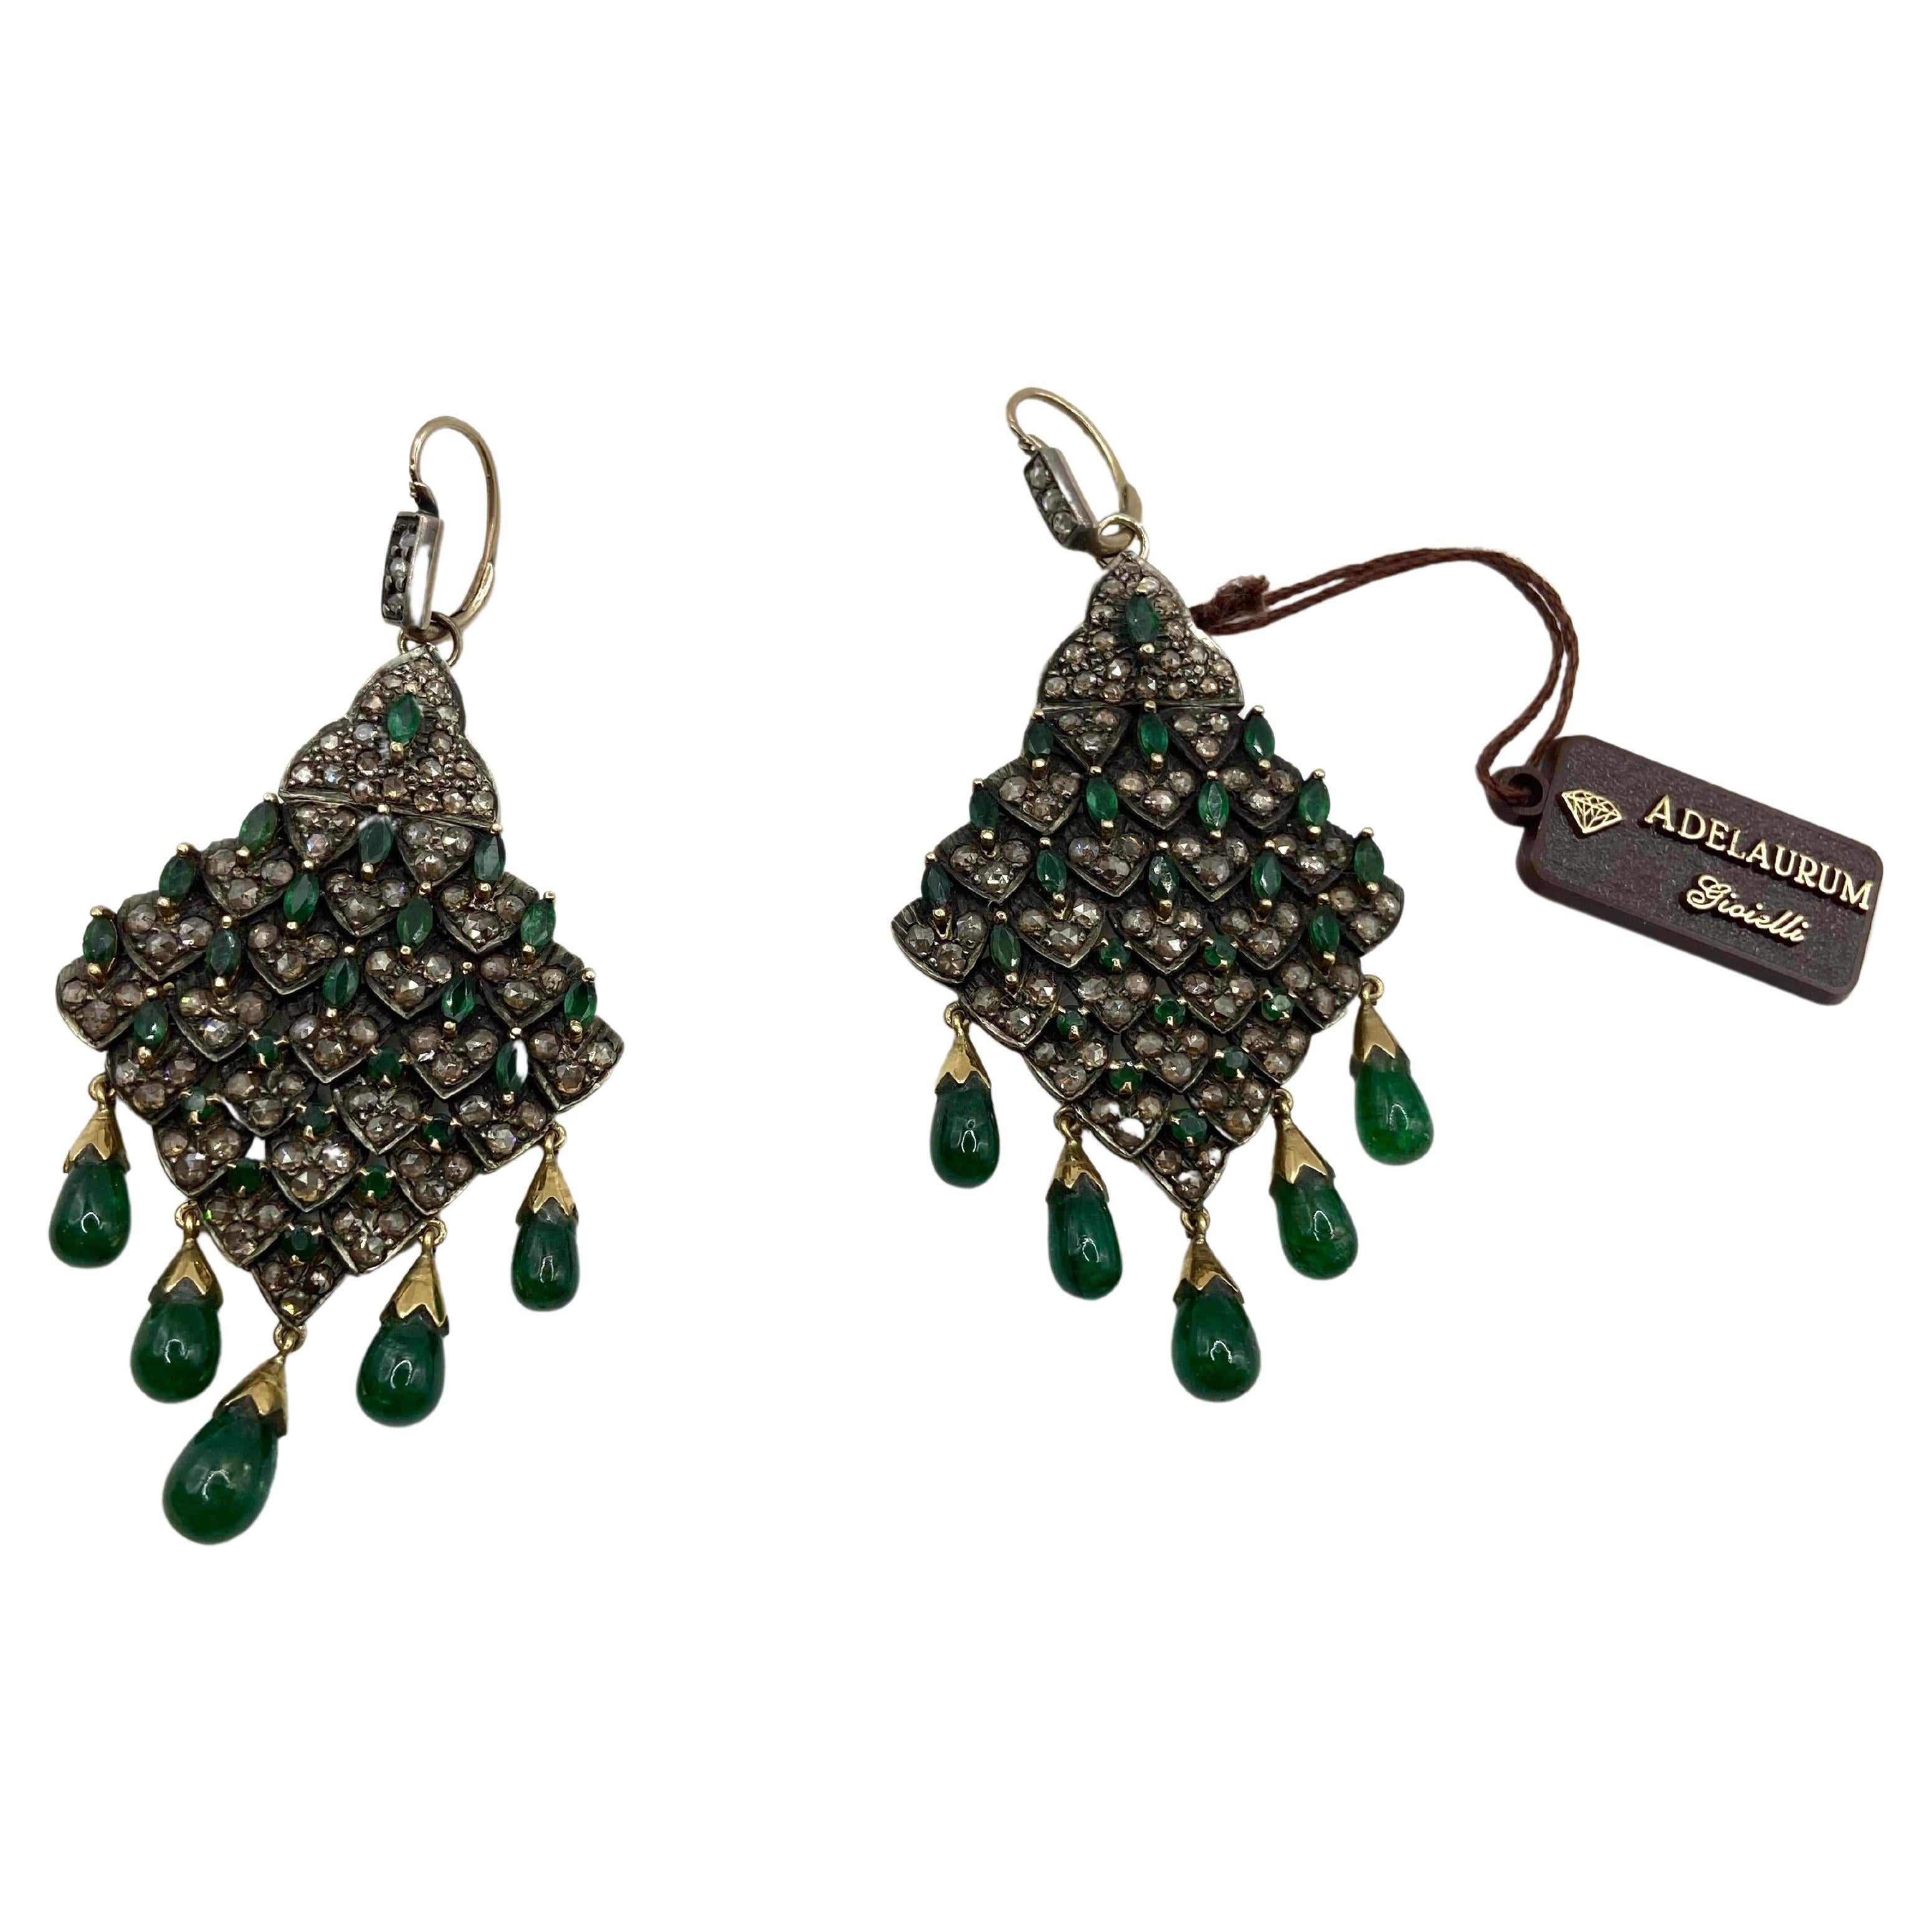 Antique Style Earrings 9Kt Gold, Diamonds, Emeralds, 1970s For Sale